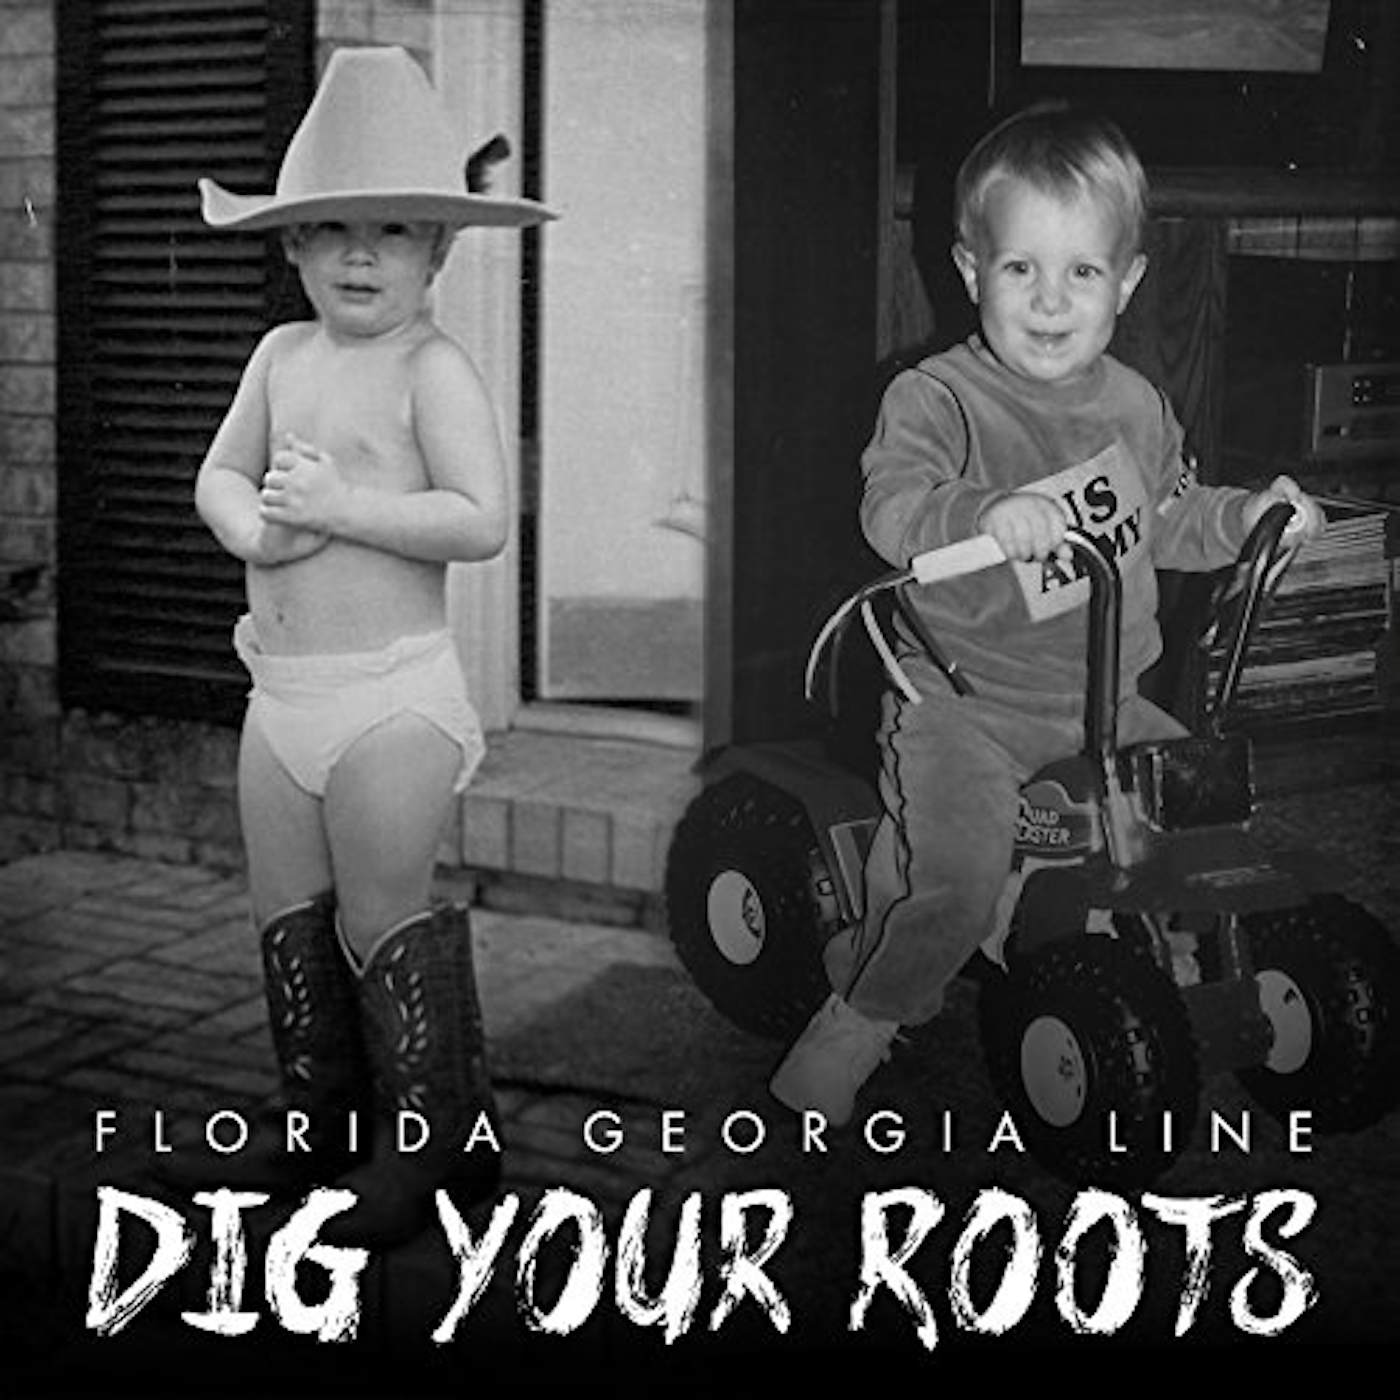 Florida Georgia Line DIG YOUR ROOTS CD